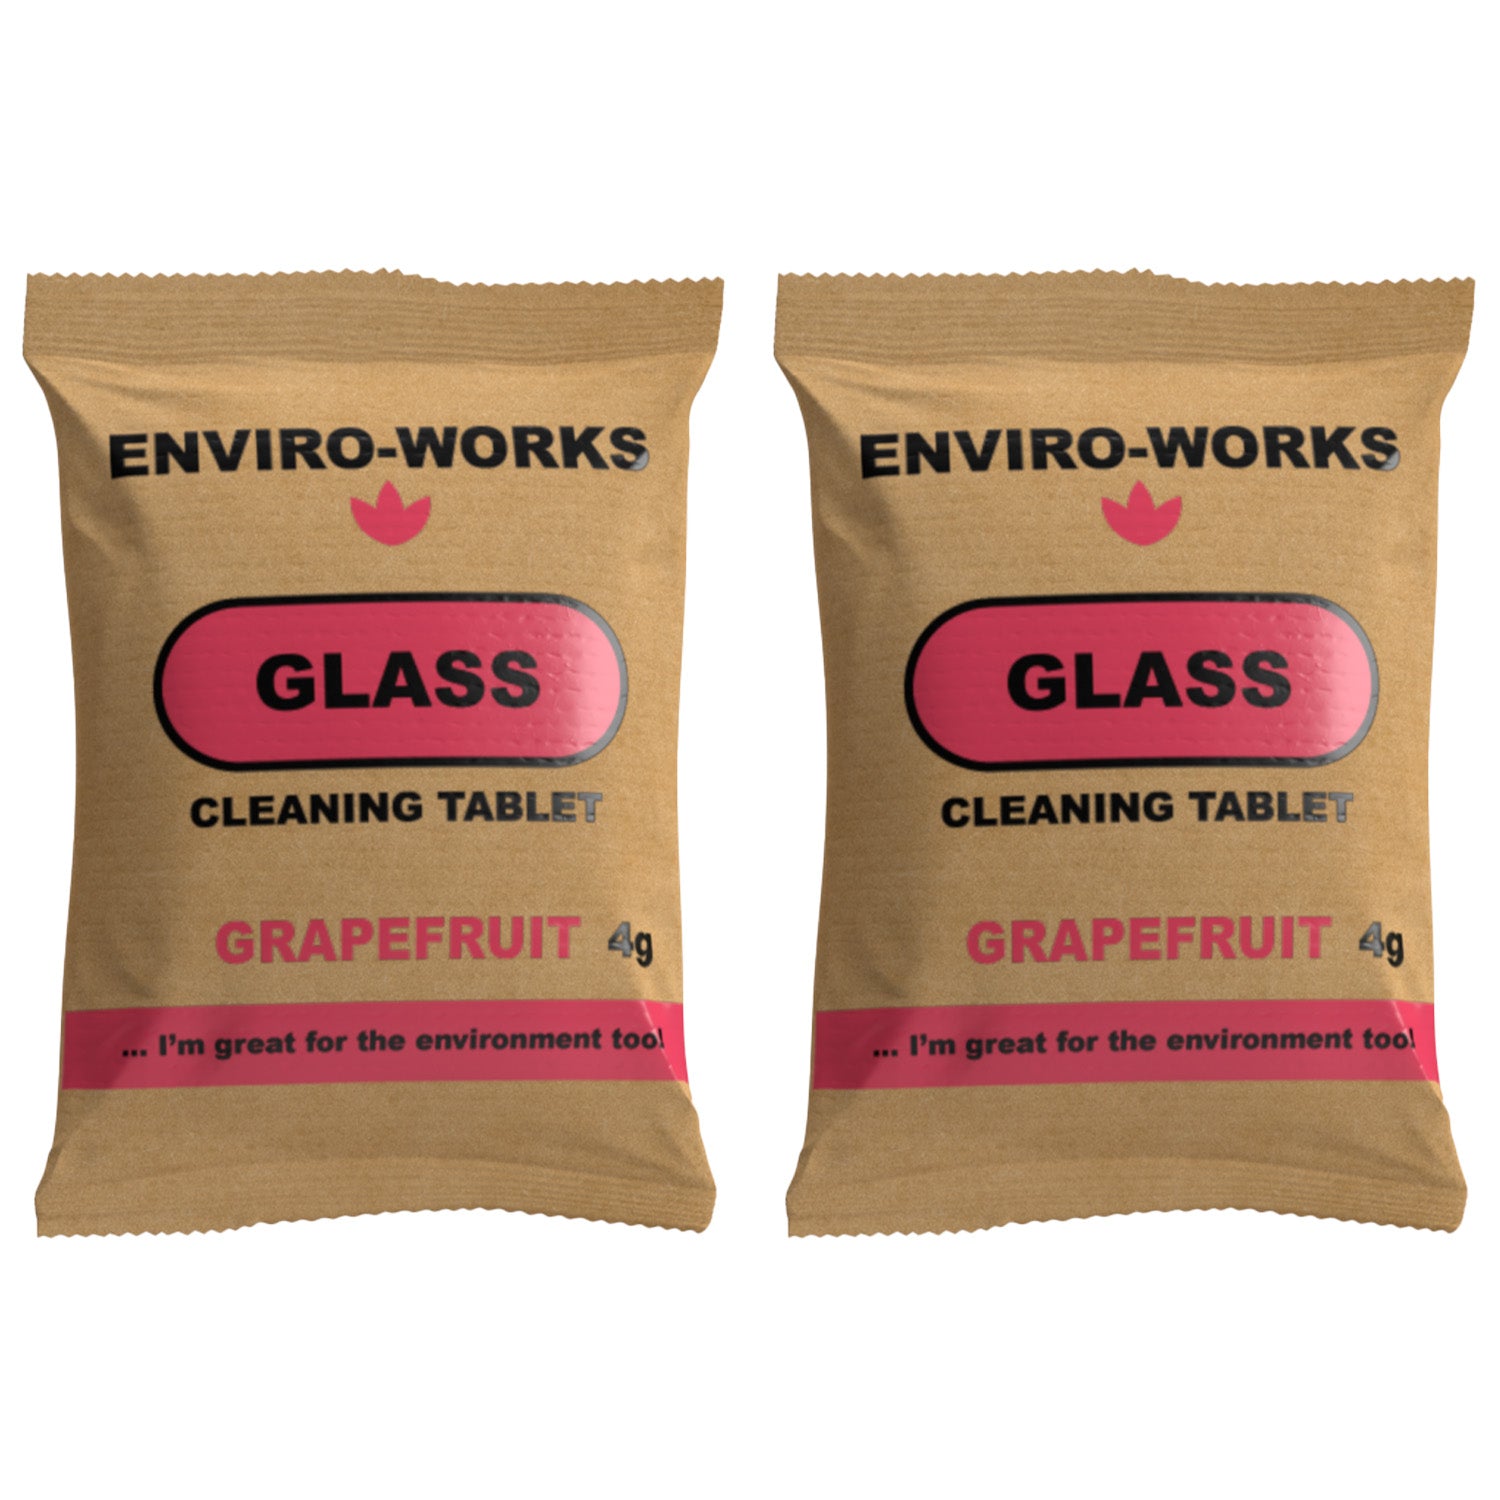 Enviro-Works Glass Cleaning Tabs x2 REFILLS